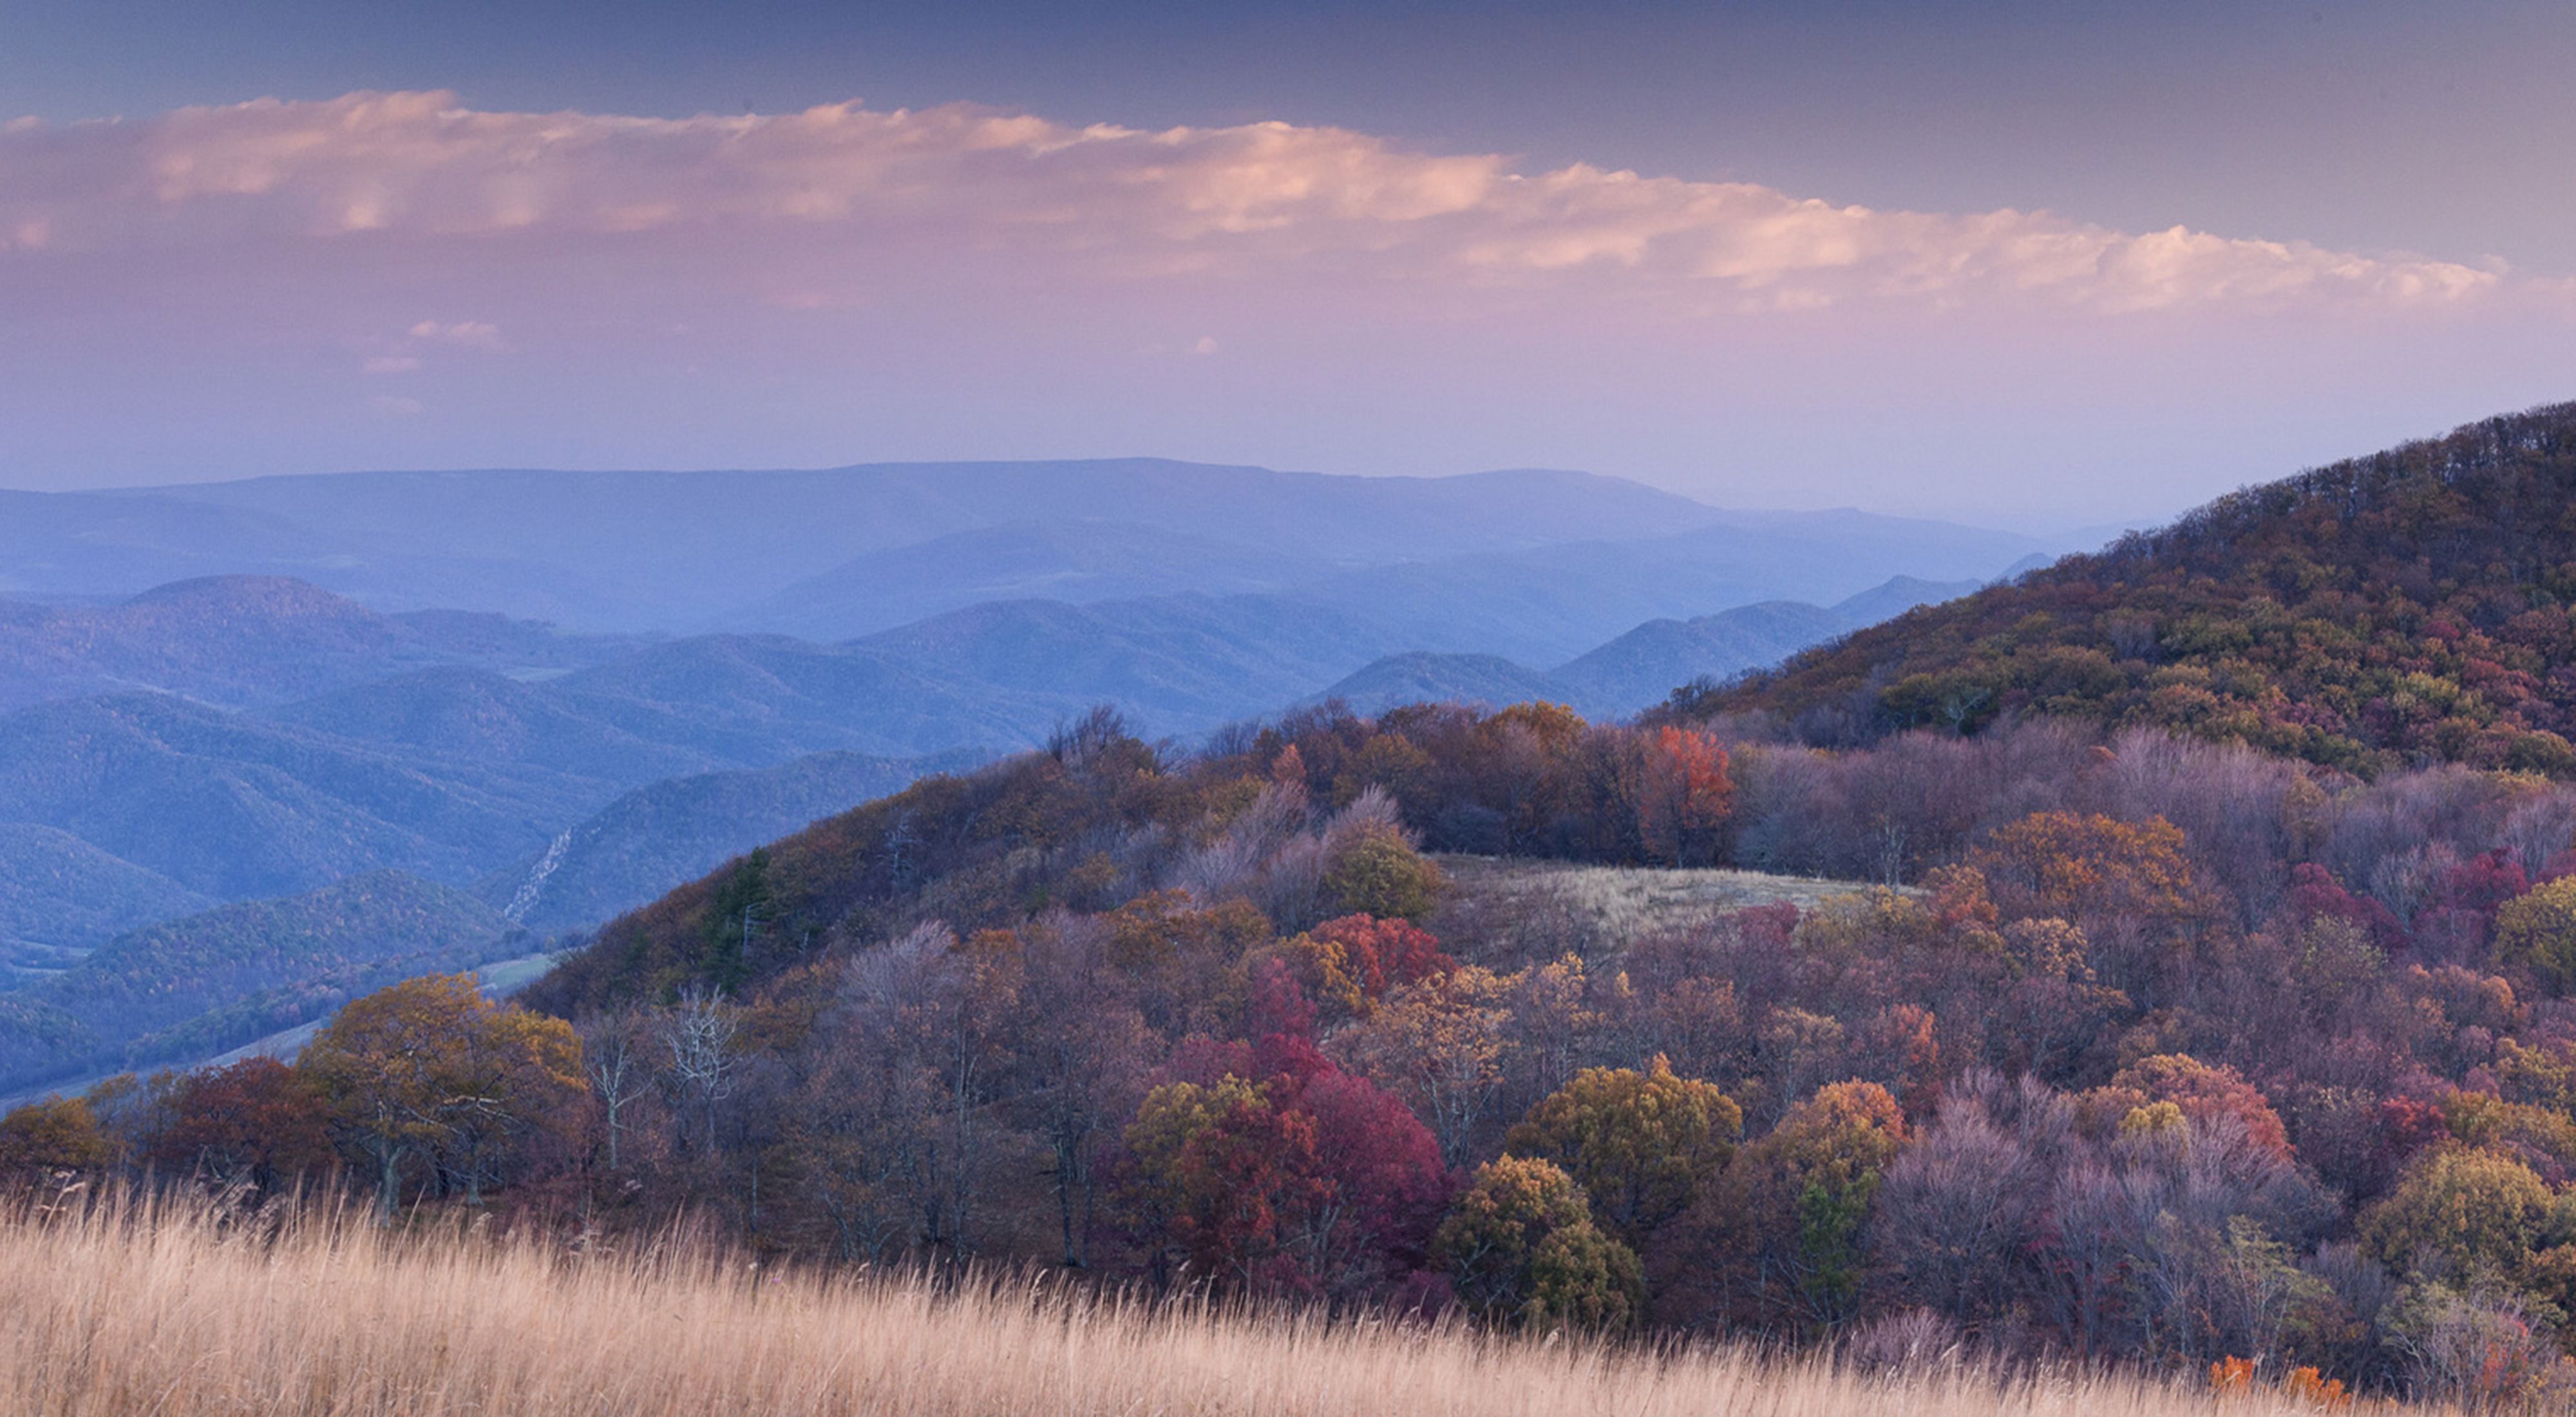 View overlooking a vast mountain range in autumn colors.